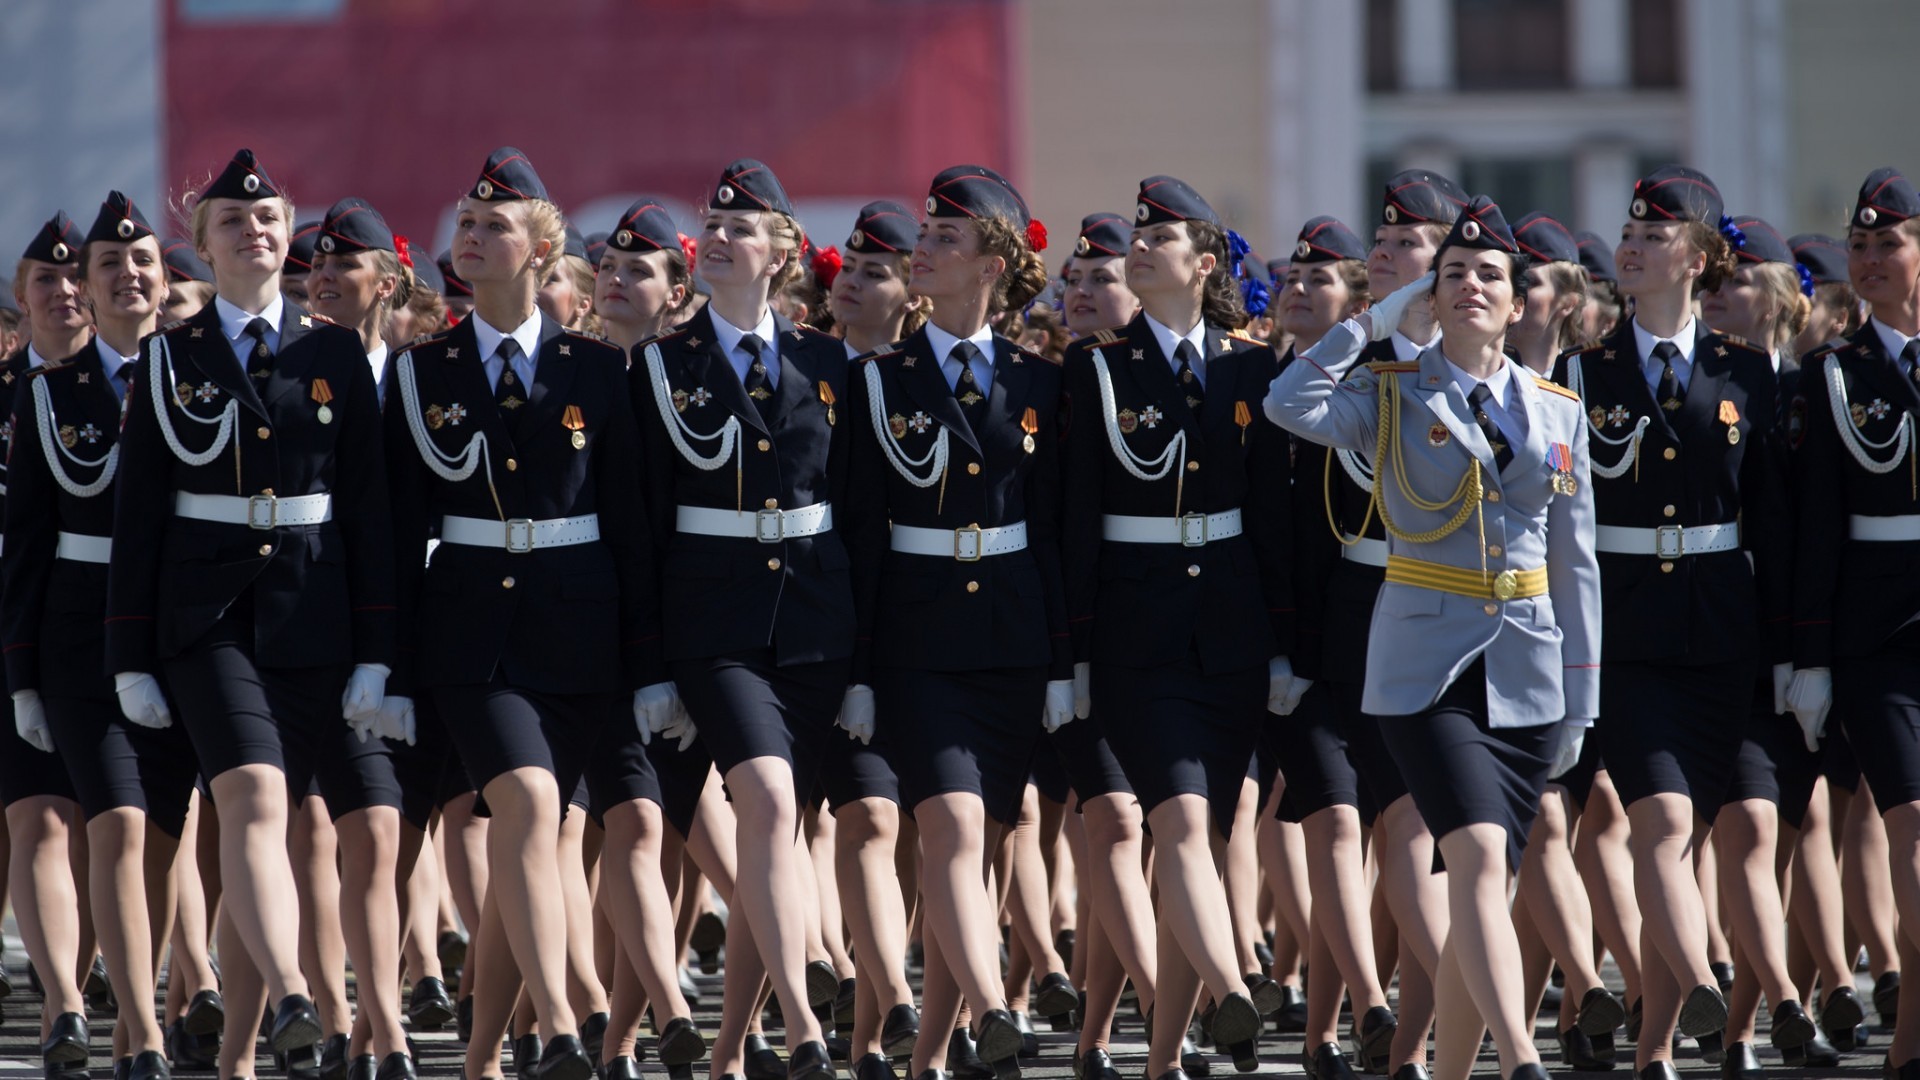 People 1920x1080 Russia group of women women military uniform military Russian Army parade Victory Day police costume uniform salute